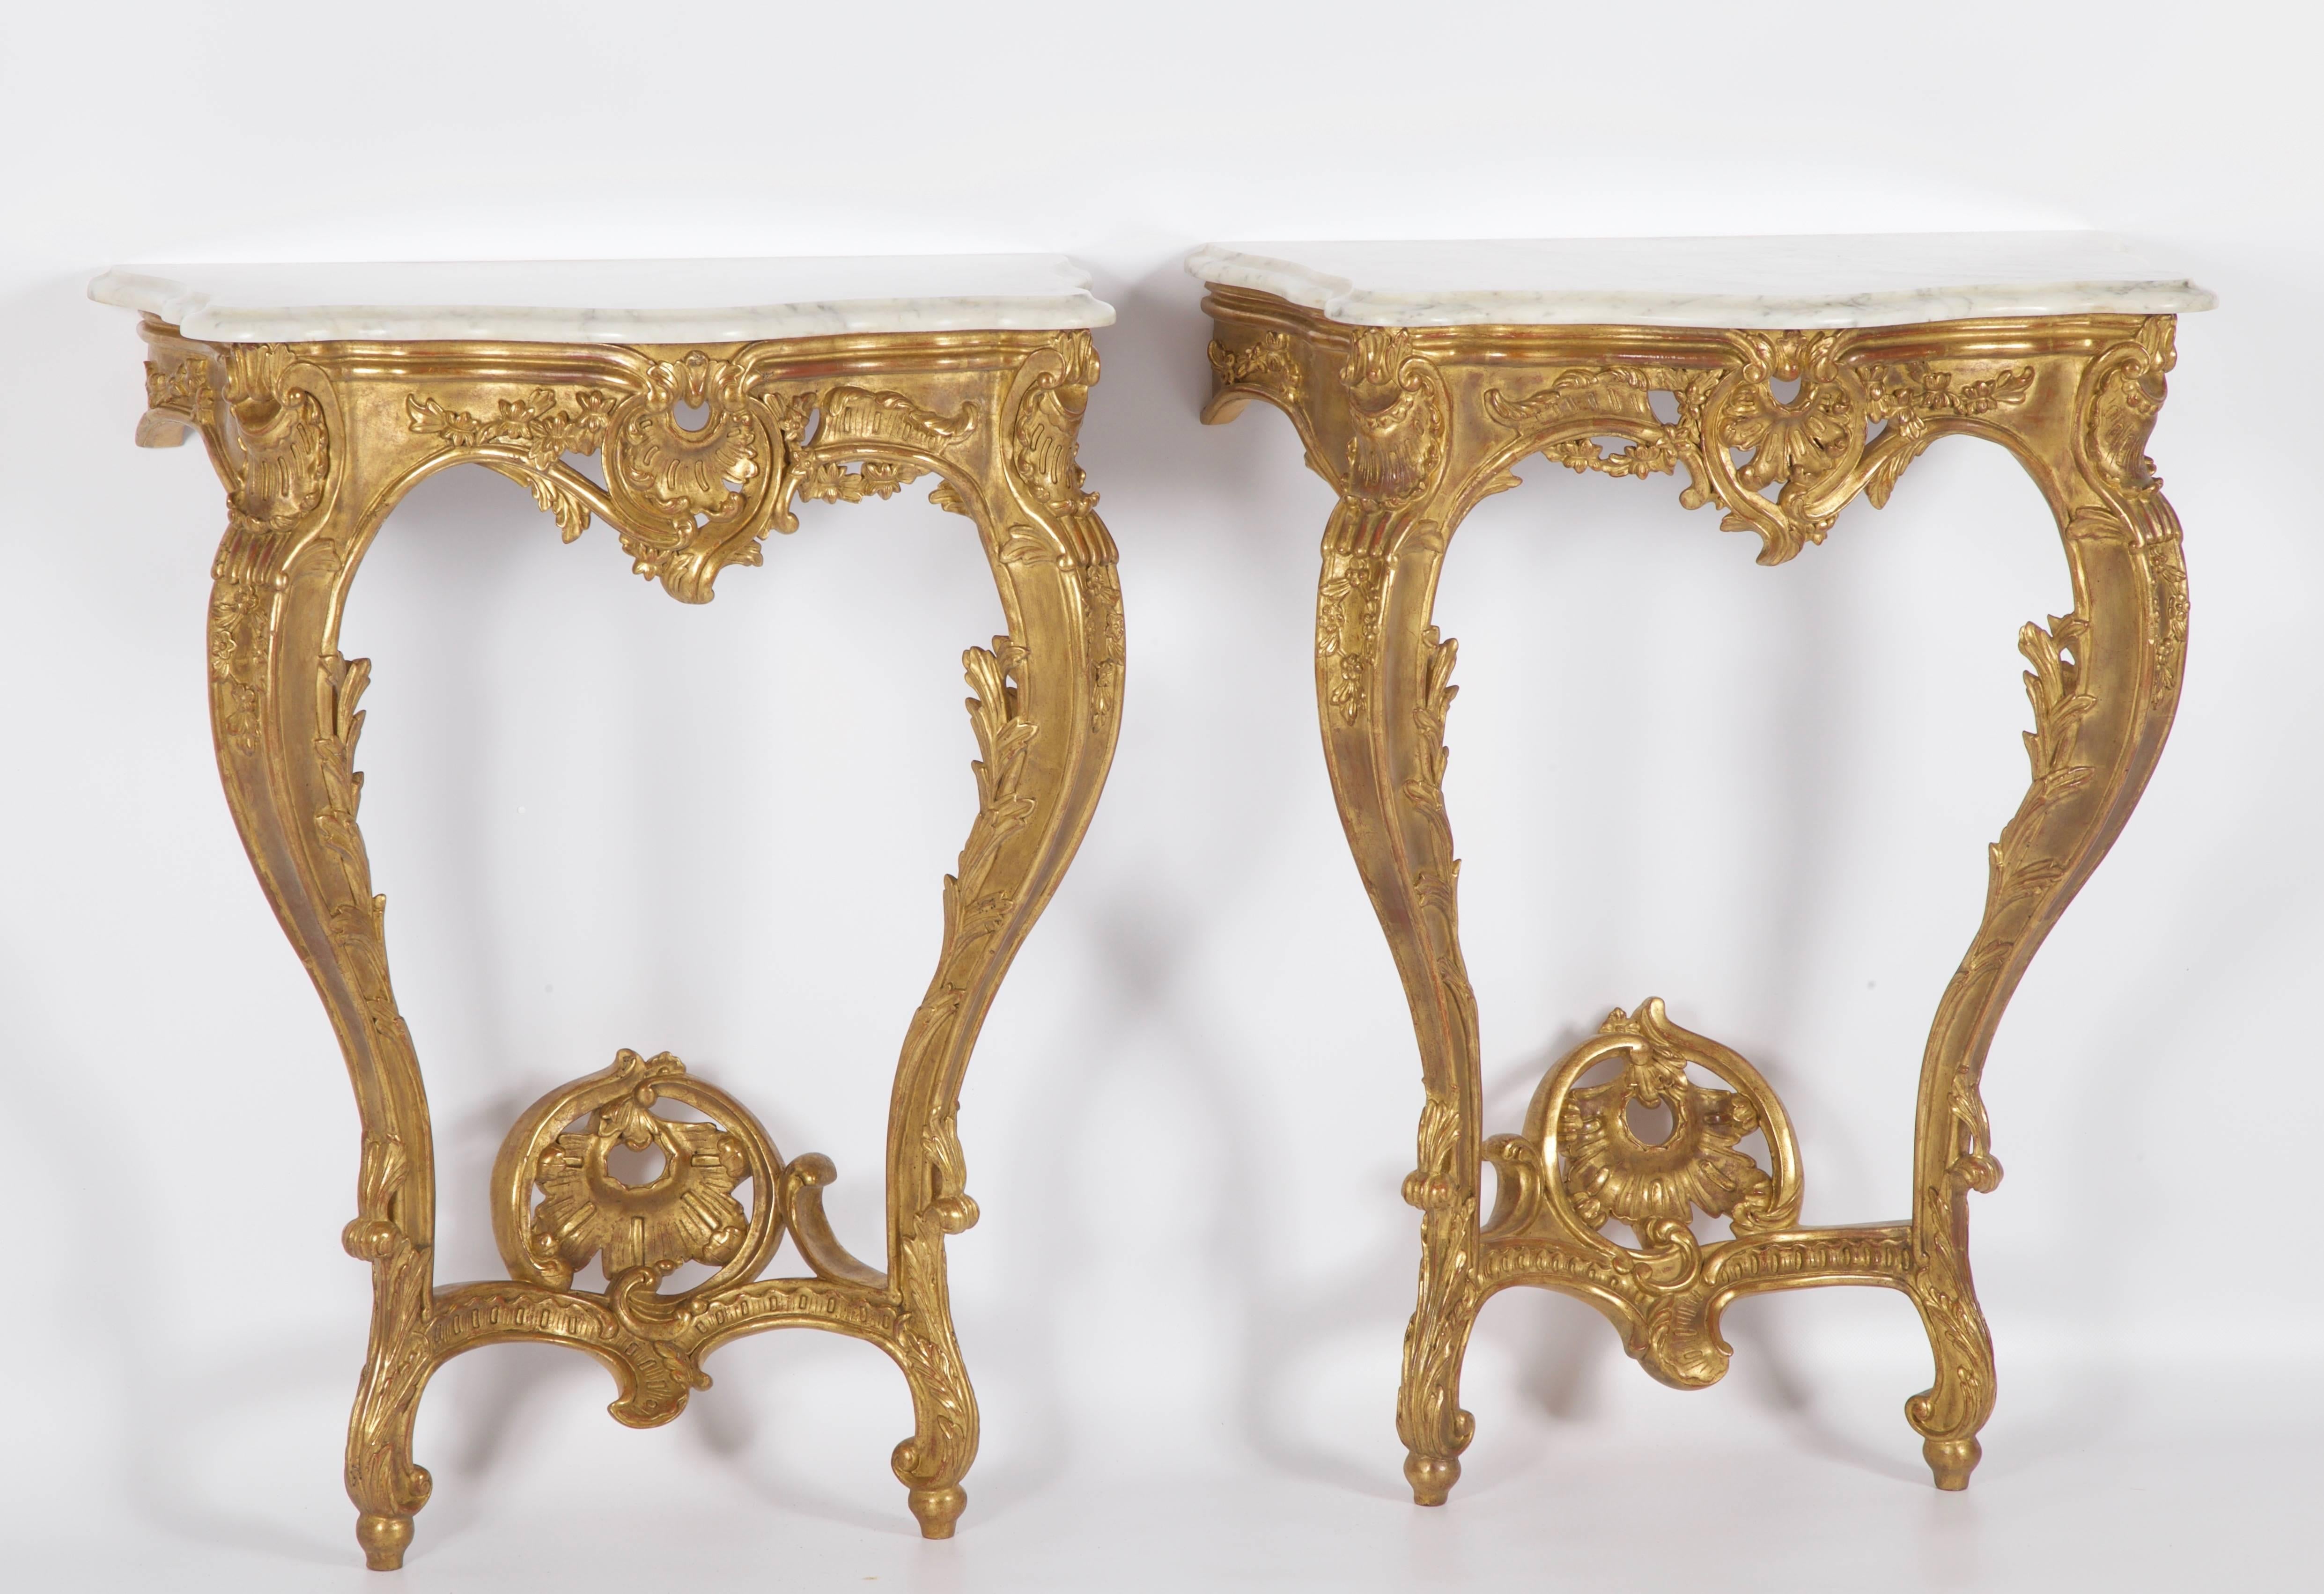 Louis XV style consoles hand-carved by master craftsmen and finished in a hand gilded patina slightly aged and distressed. Topped with Carrara marble which has been beveled, shaped and polished .